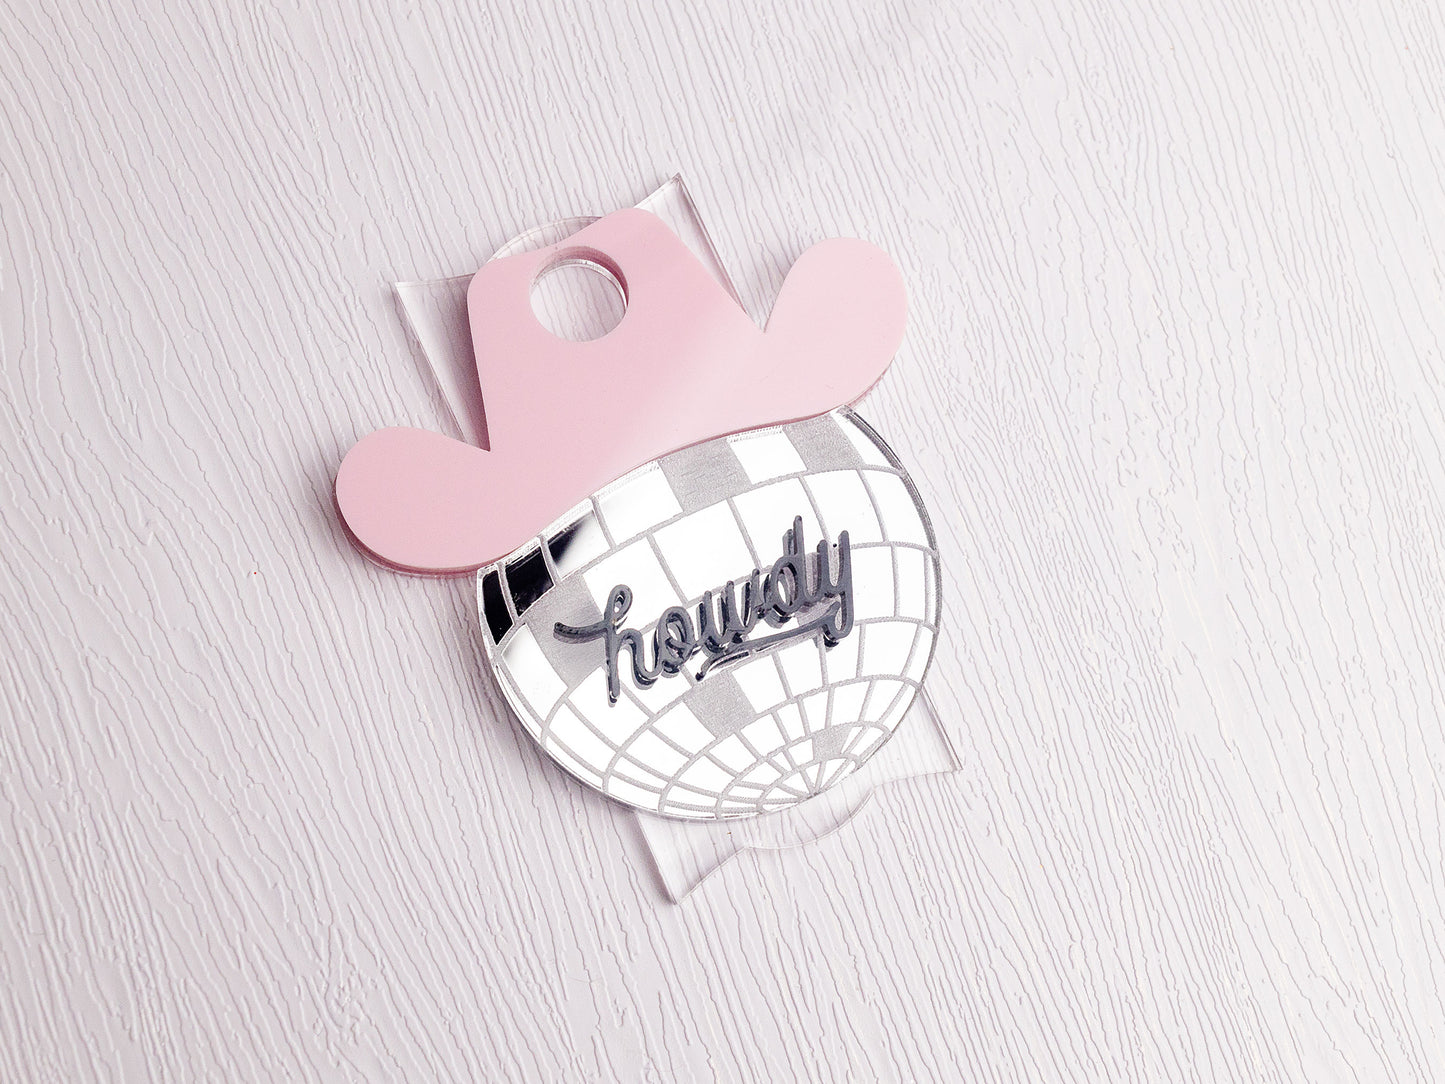 Disco Ball Howdy Tumbler Tag Topper - Tumbler Topper Plate for Stanley Cups